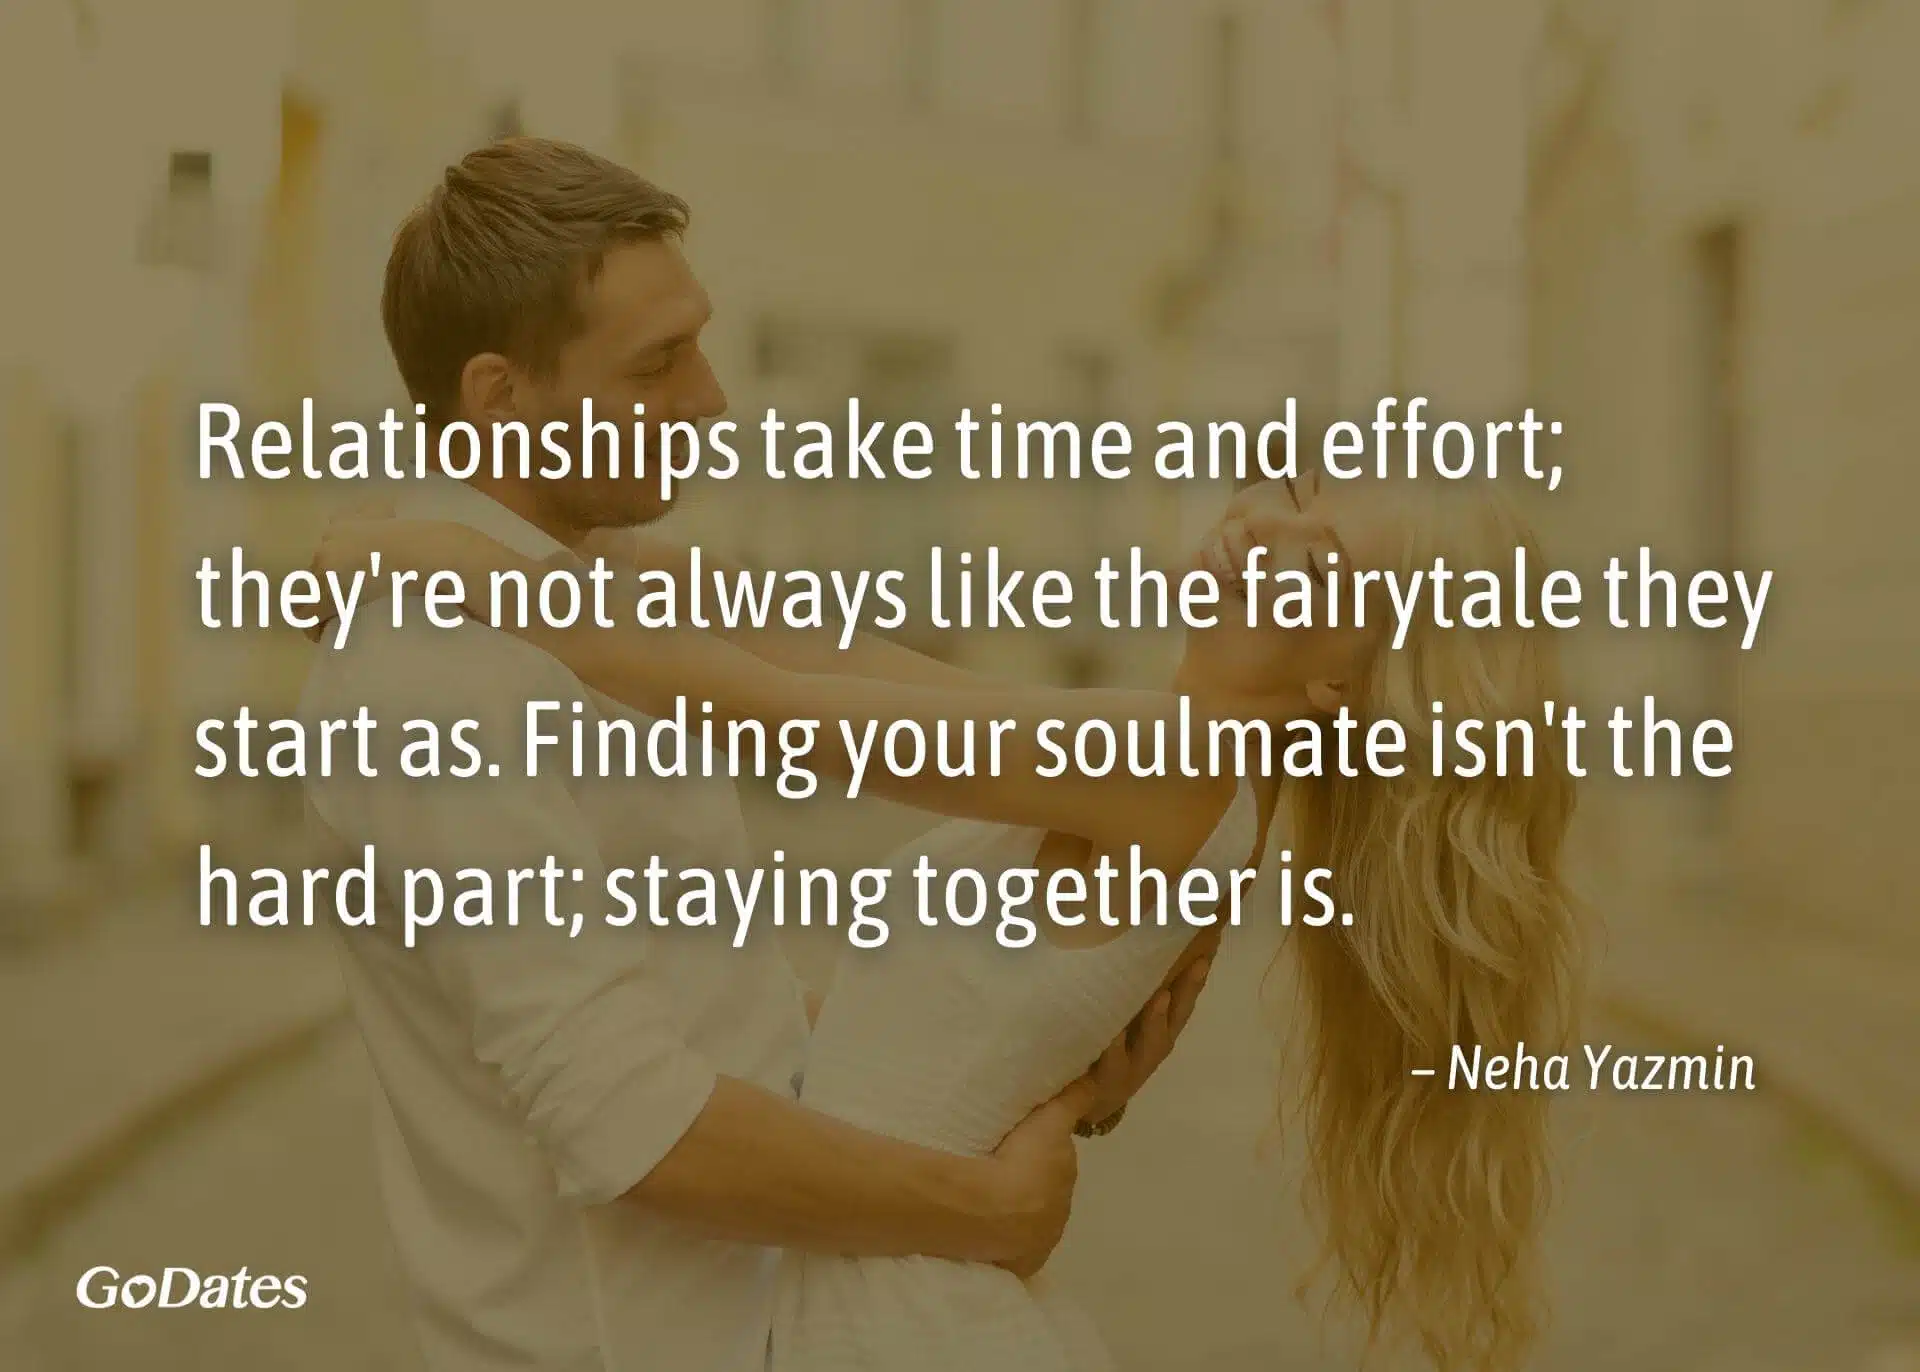 Relationships take time and effort quote